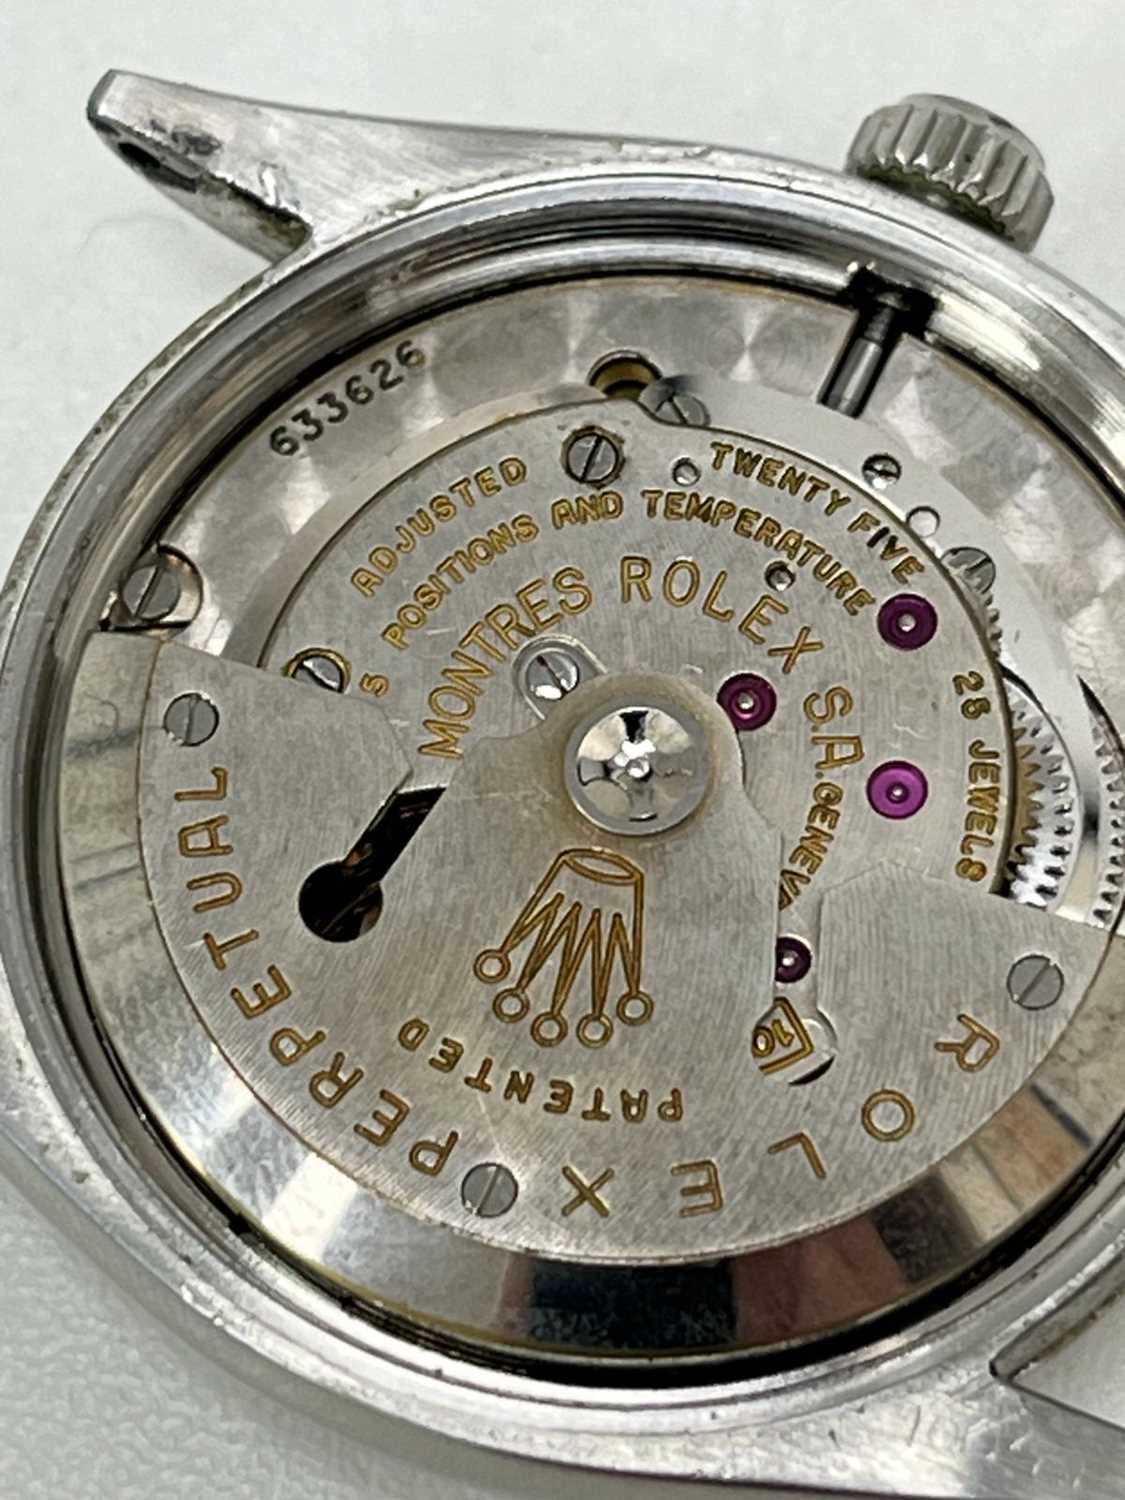 A gentlemen's stainless steel Rolex Oyster Perpetual automatic watch, c.1957, - Image 5 of 5